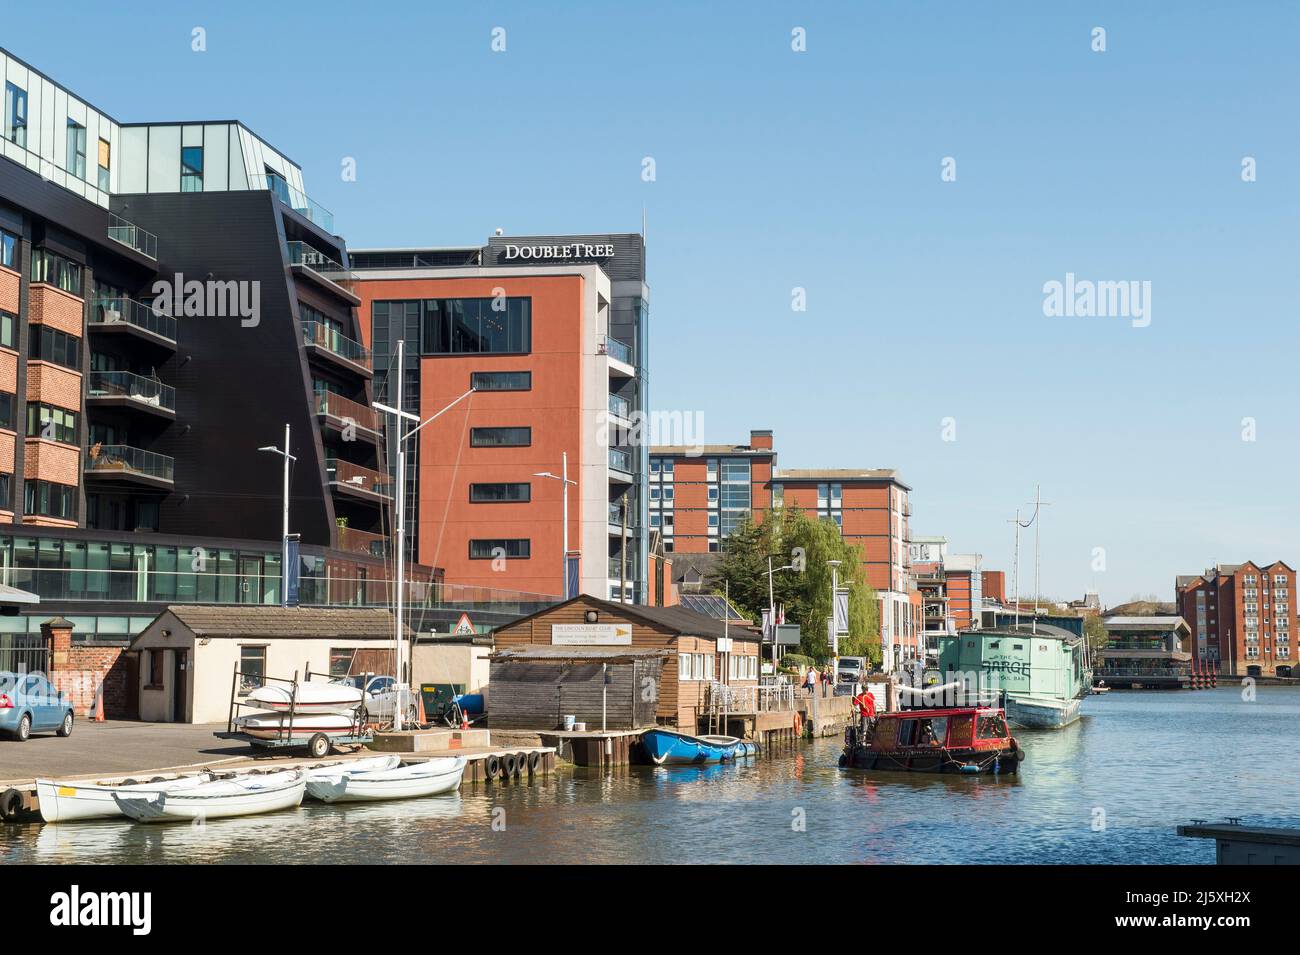 Lincoln, an historic  cathedral city in the county of Lincolnshire, UK.The picture shows the city's waterfront - Brayford Wharf - including boats, re Stock Photo